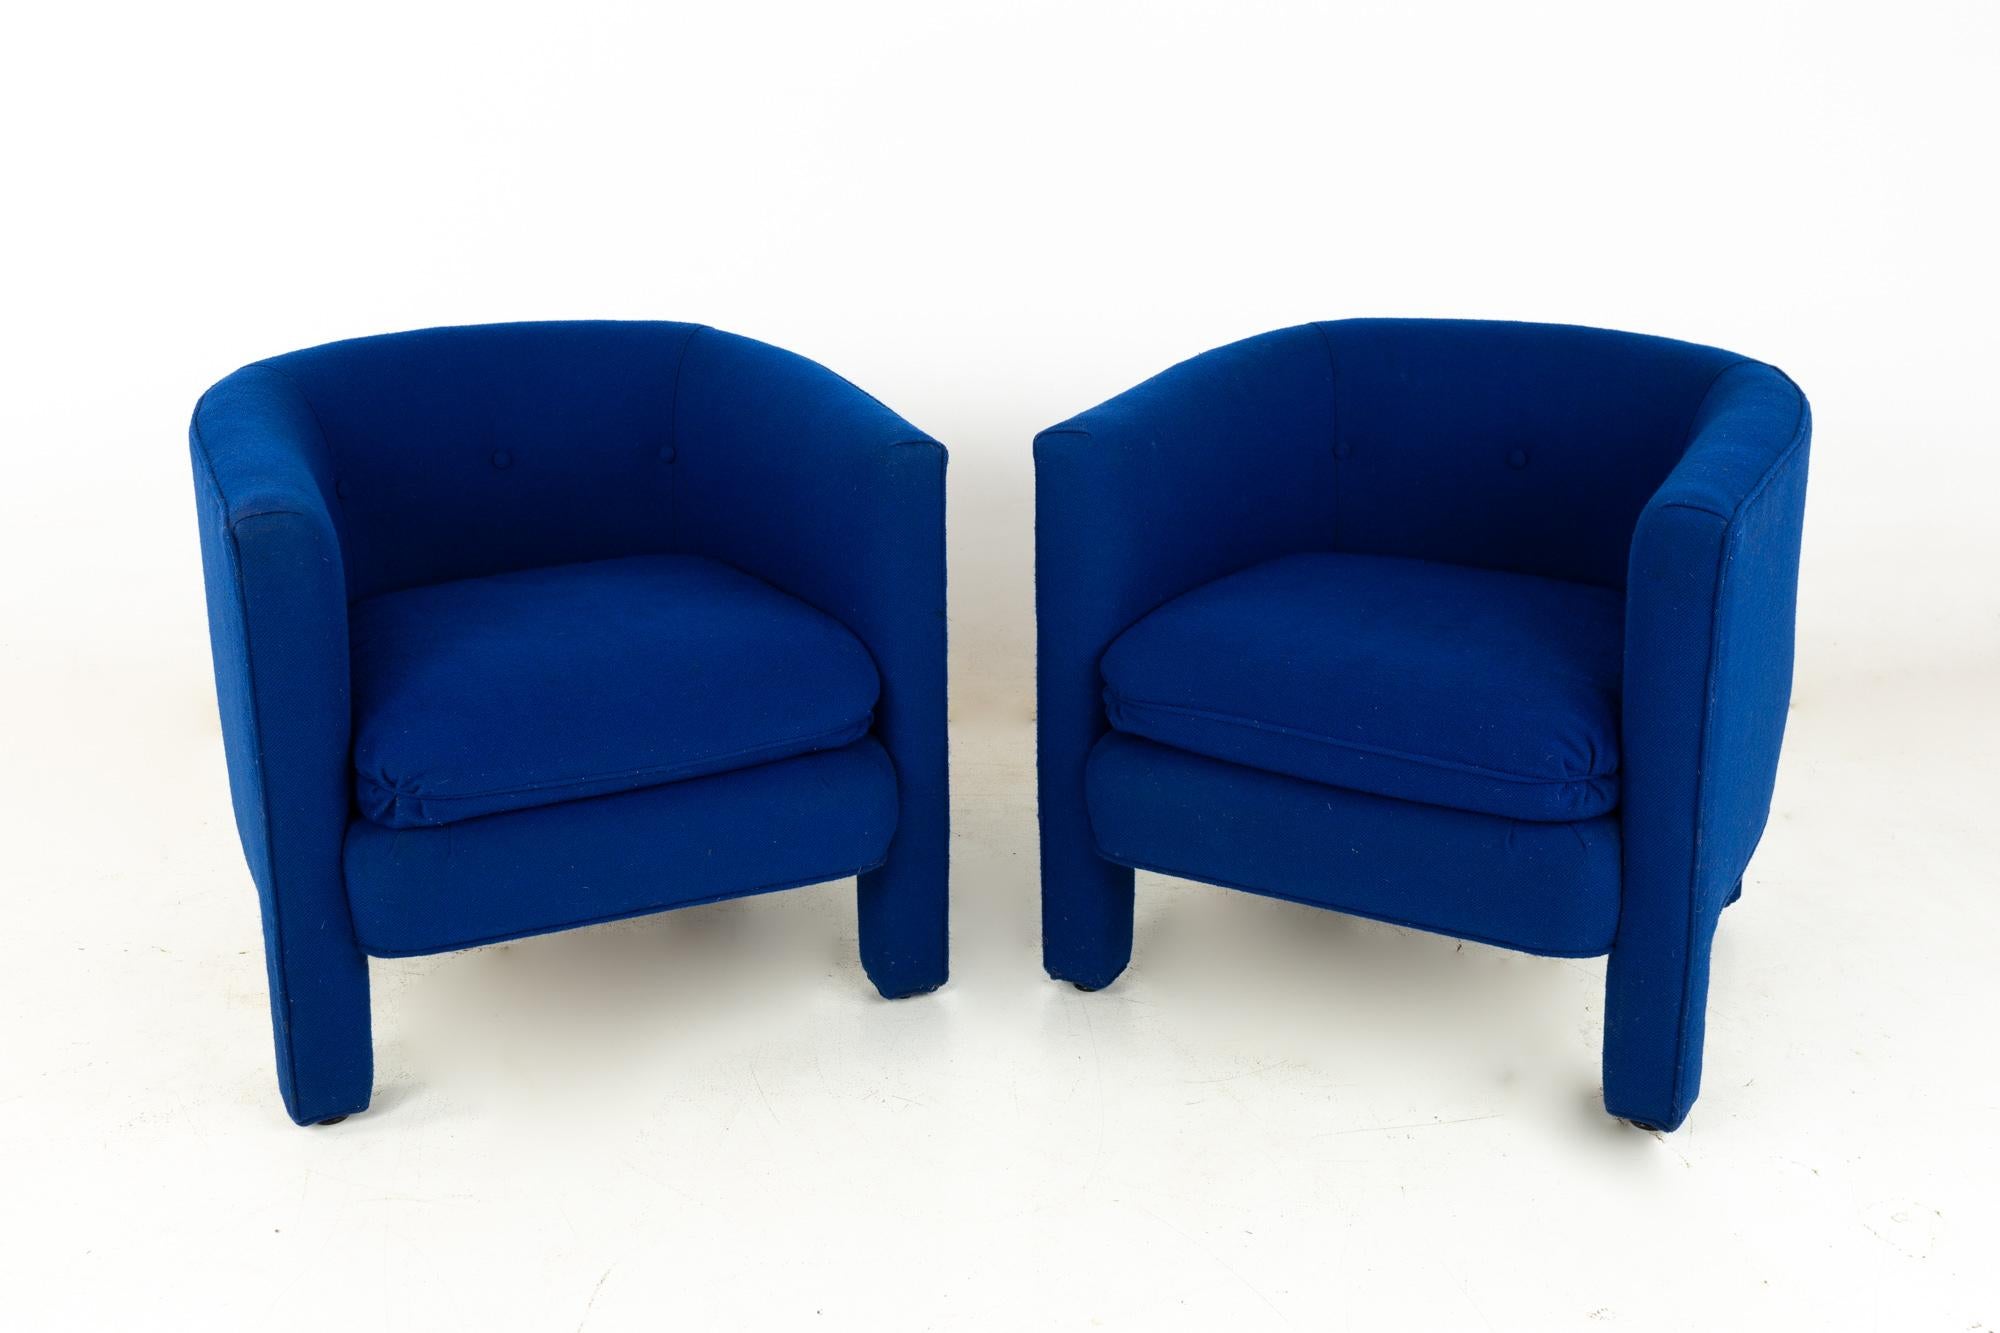 Drexel Heritage mid century upholstered blue club lounge chairs - pair
These chairs measure: 29 wide x 29.5 deep x 27.5 inches high, with a seat height of 16.25 and arm height of 26 inches

All pieces of furniture can be had in what we call